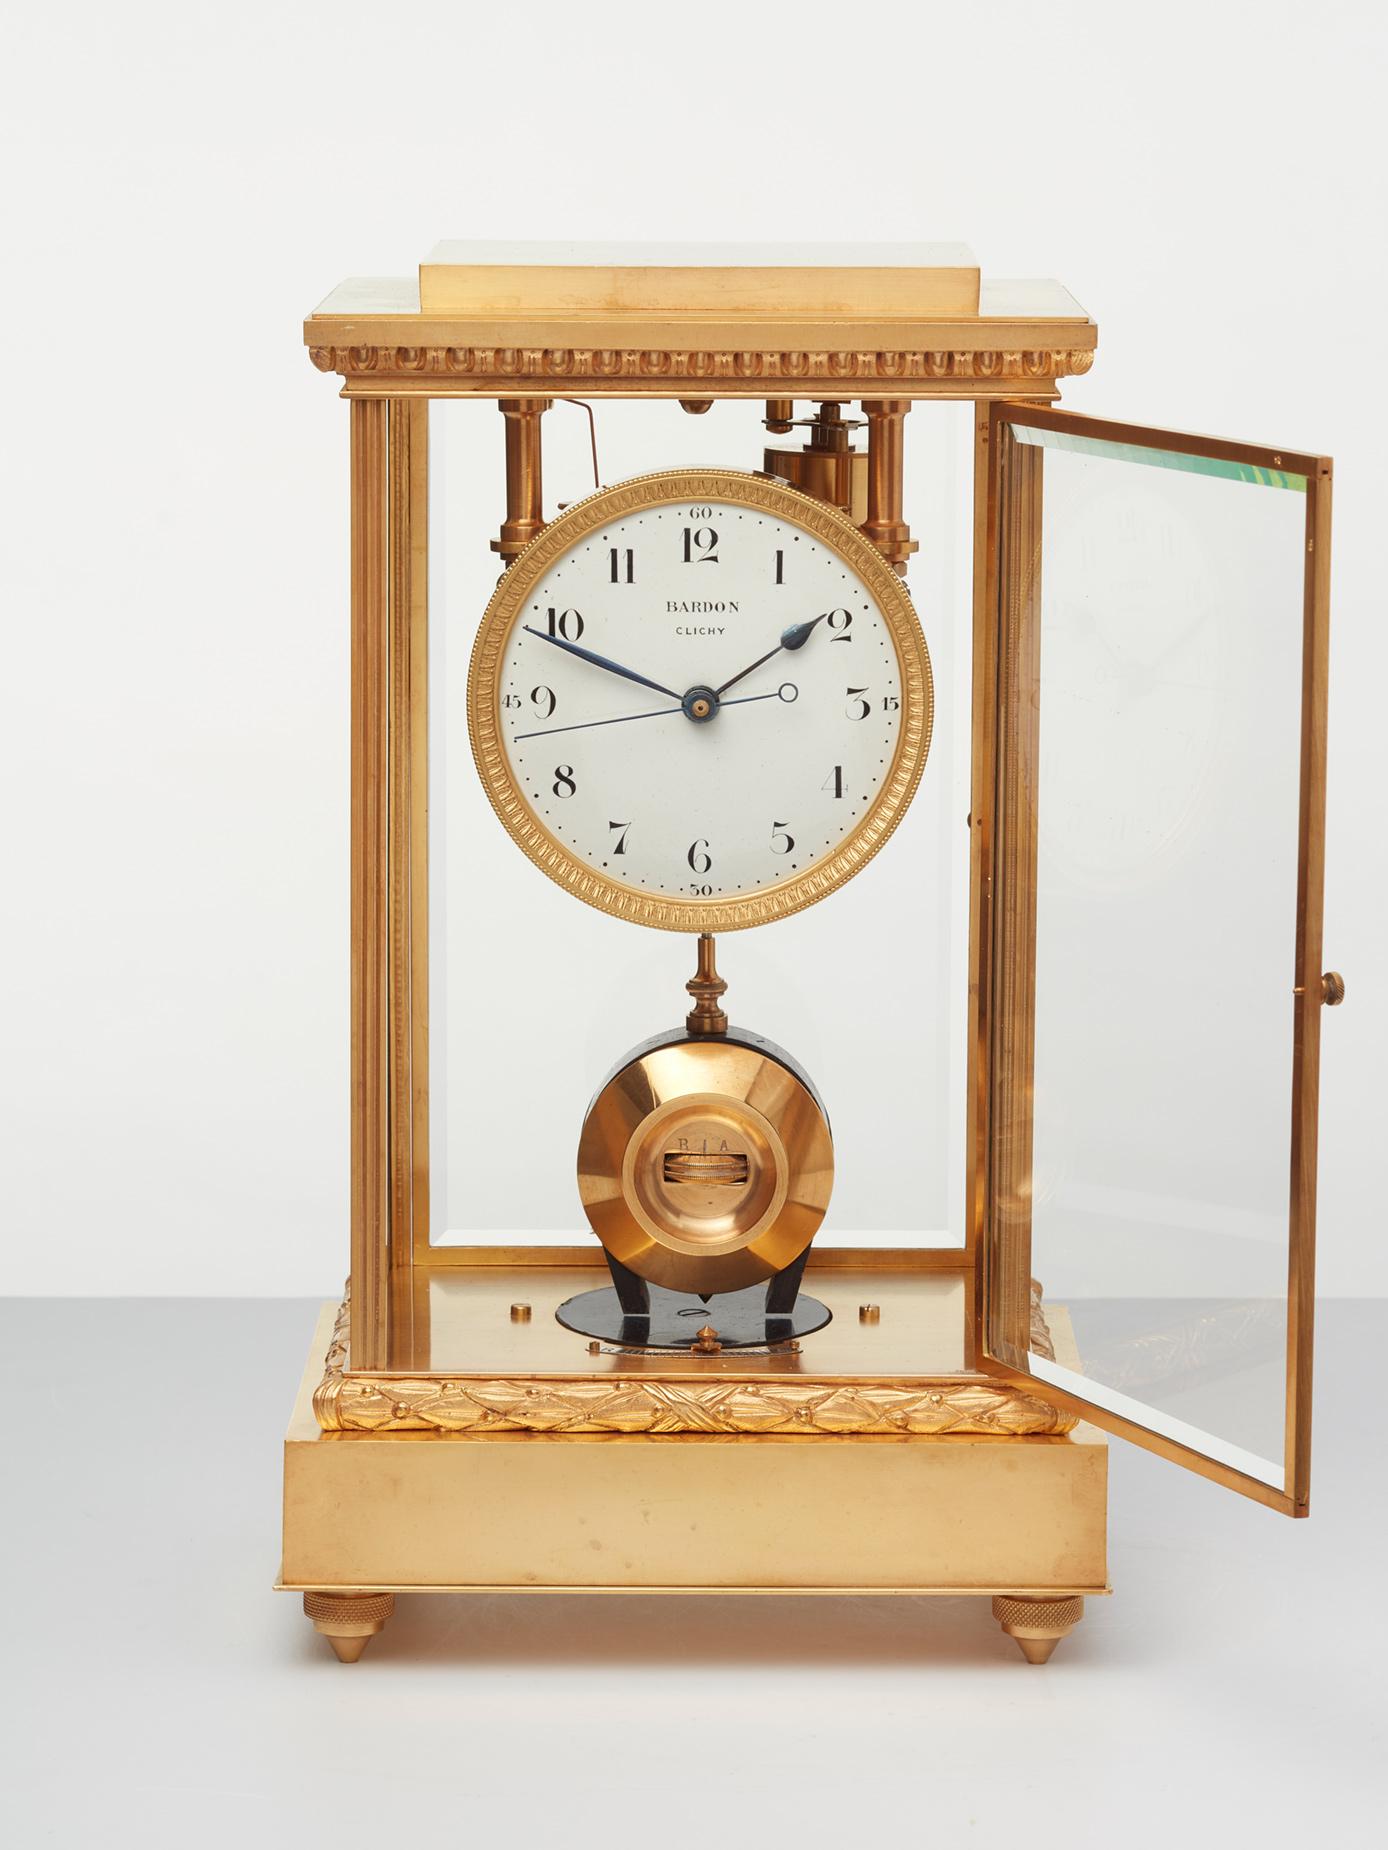 This ‘four glass’ mantel regulator is of extraordinary high quality. The luxury guilded case is quite unusual and was an additional option when the clock was ordered. The ‘central sweep-second’ hand was a superior optional extra. 

These electrical